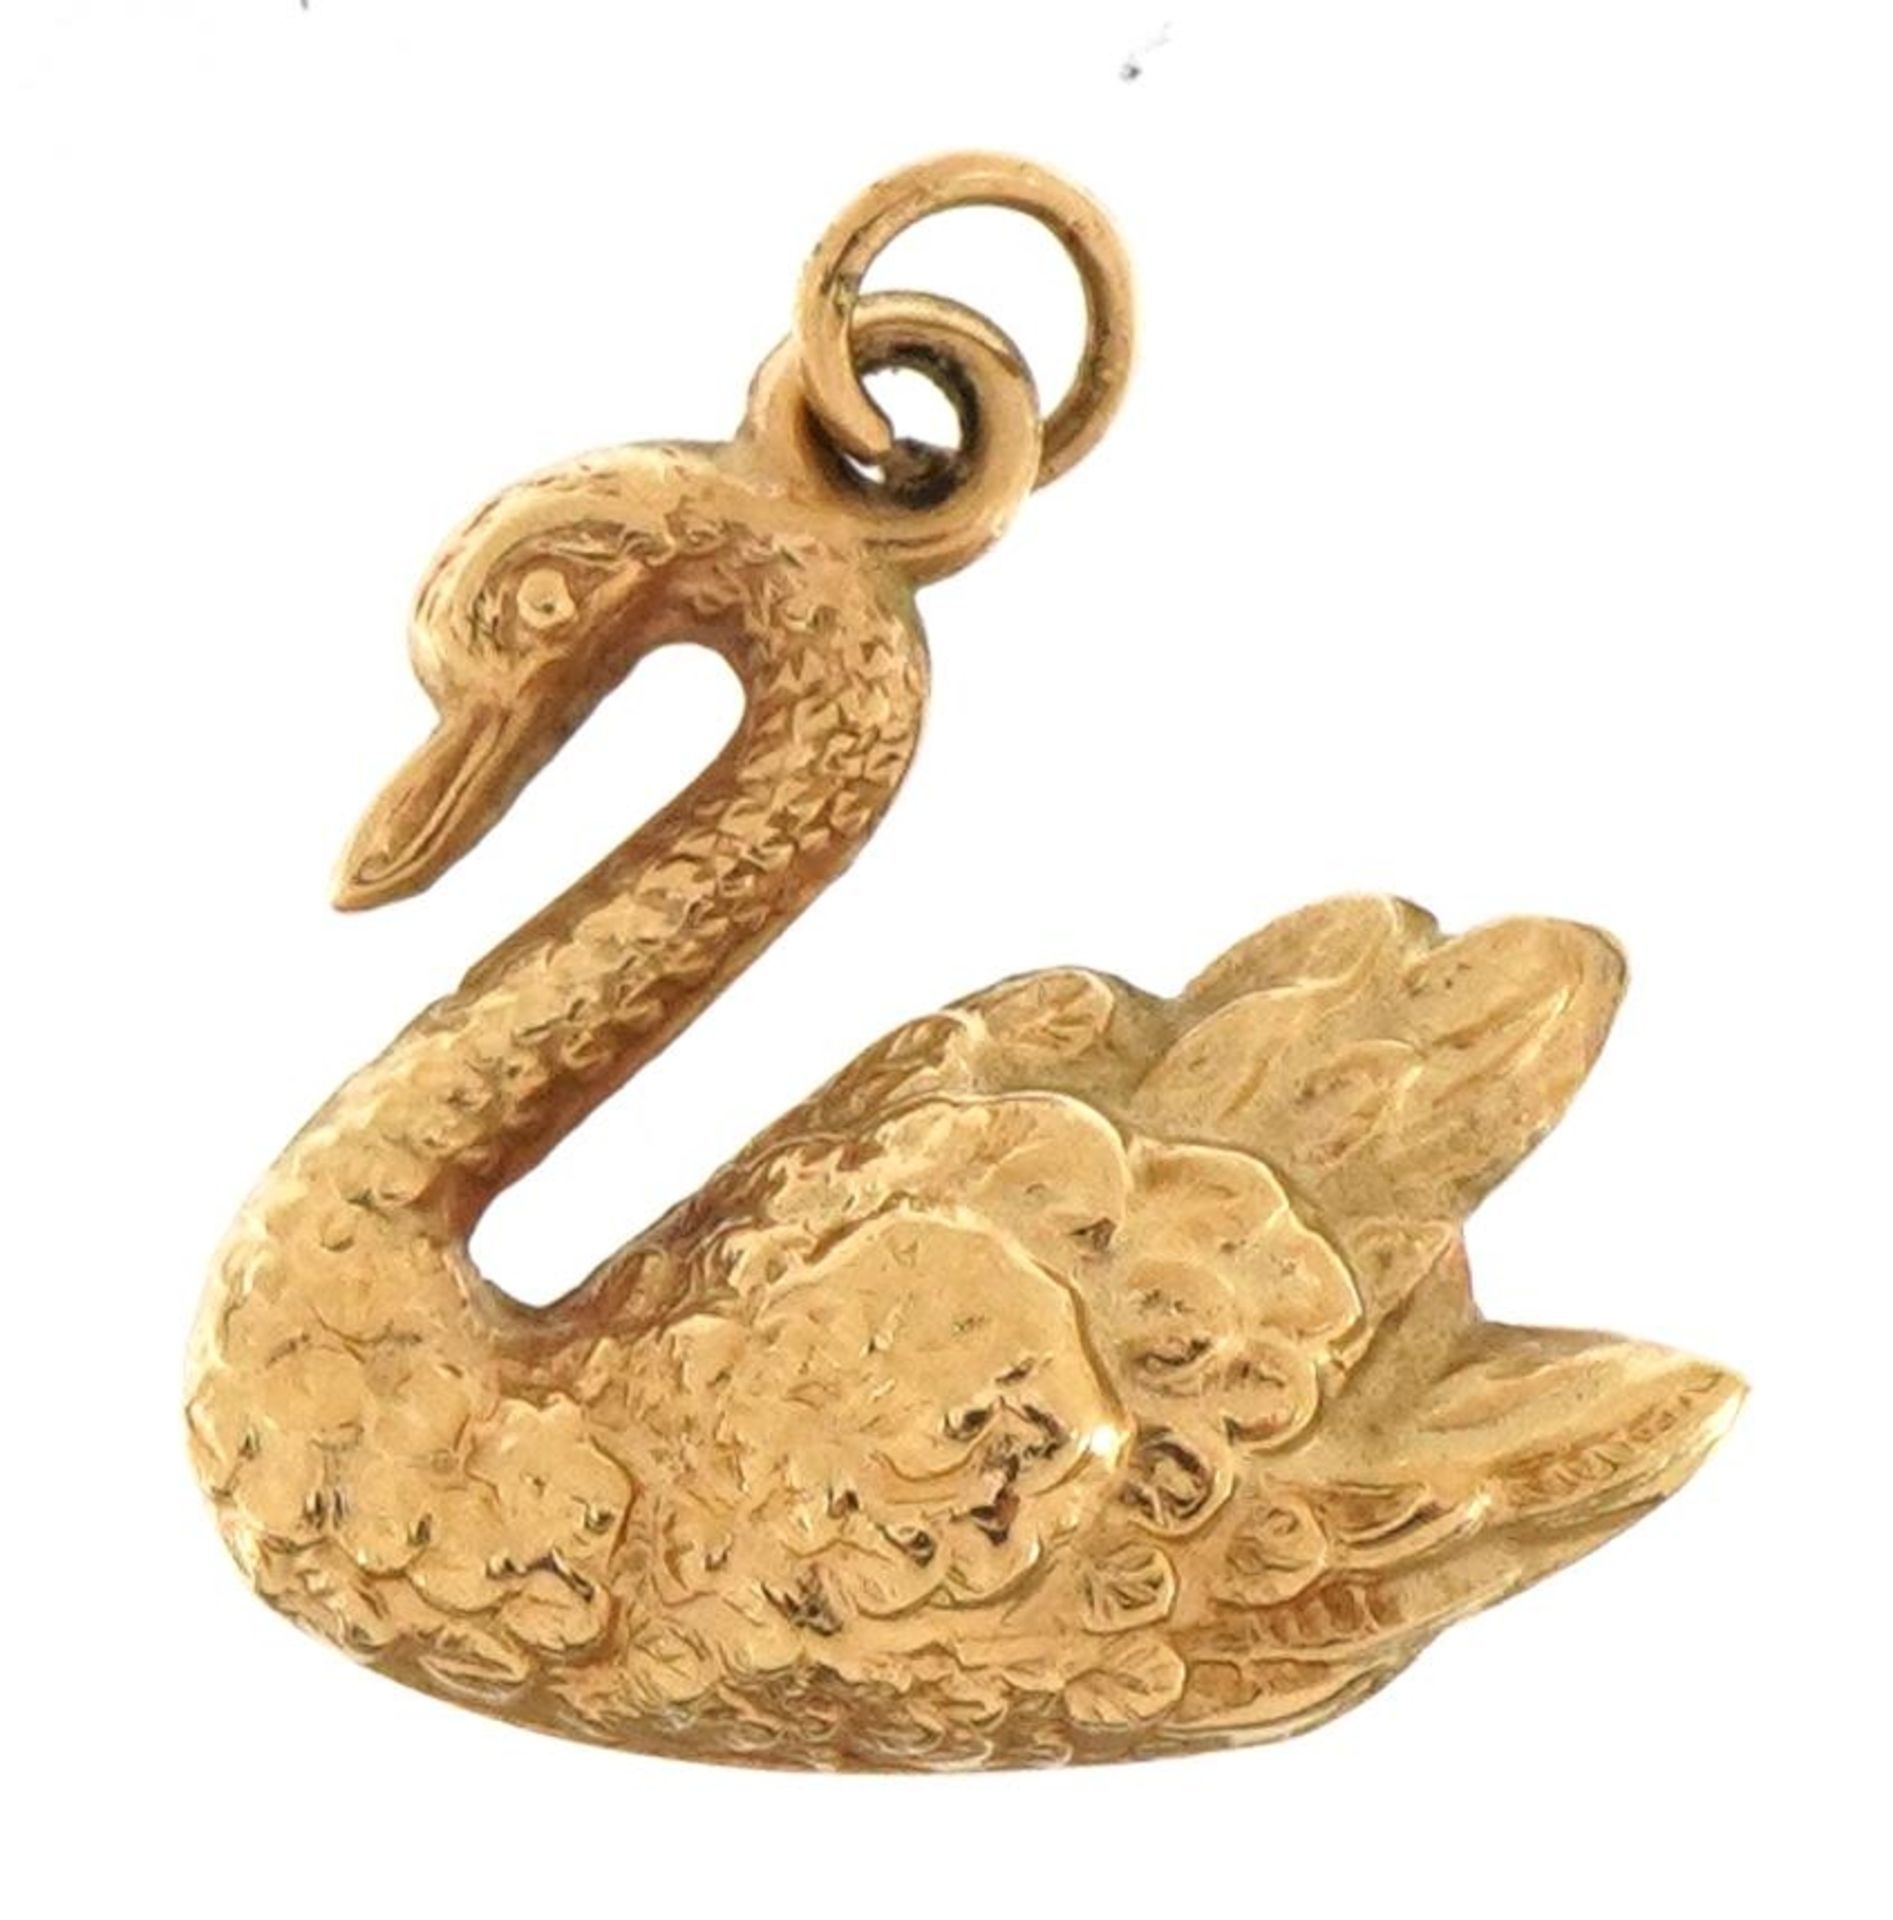 Unmarked gold swan charm, 1.6cm wide, 0.8g